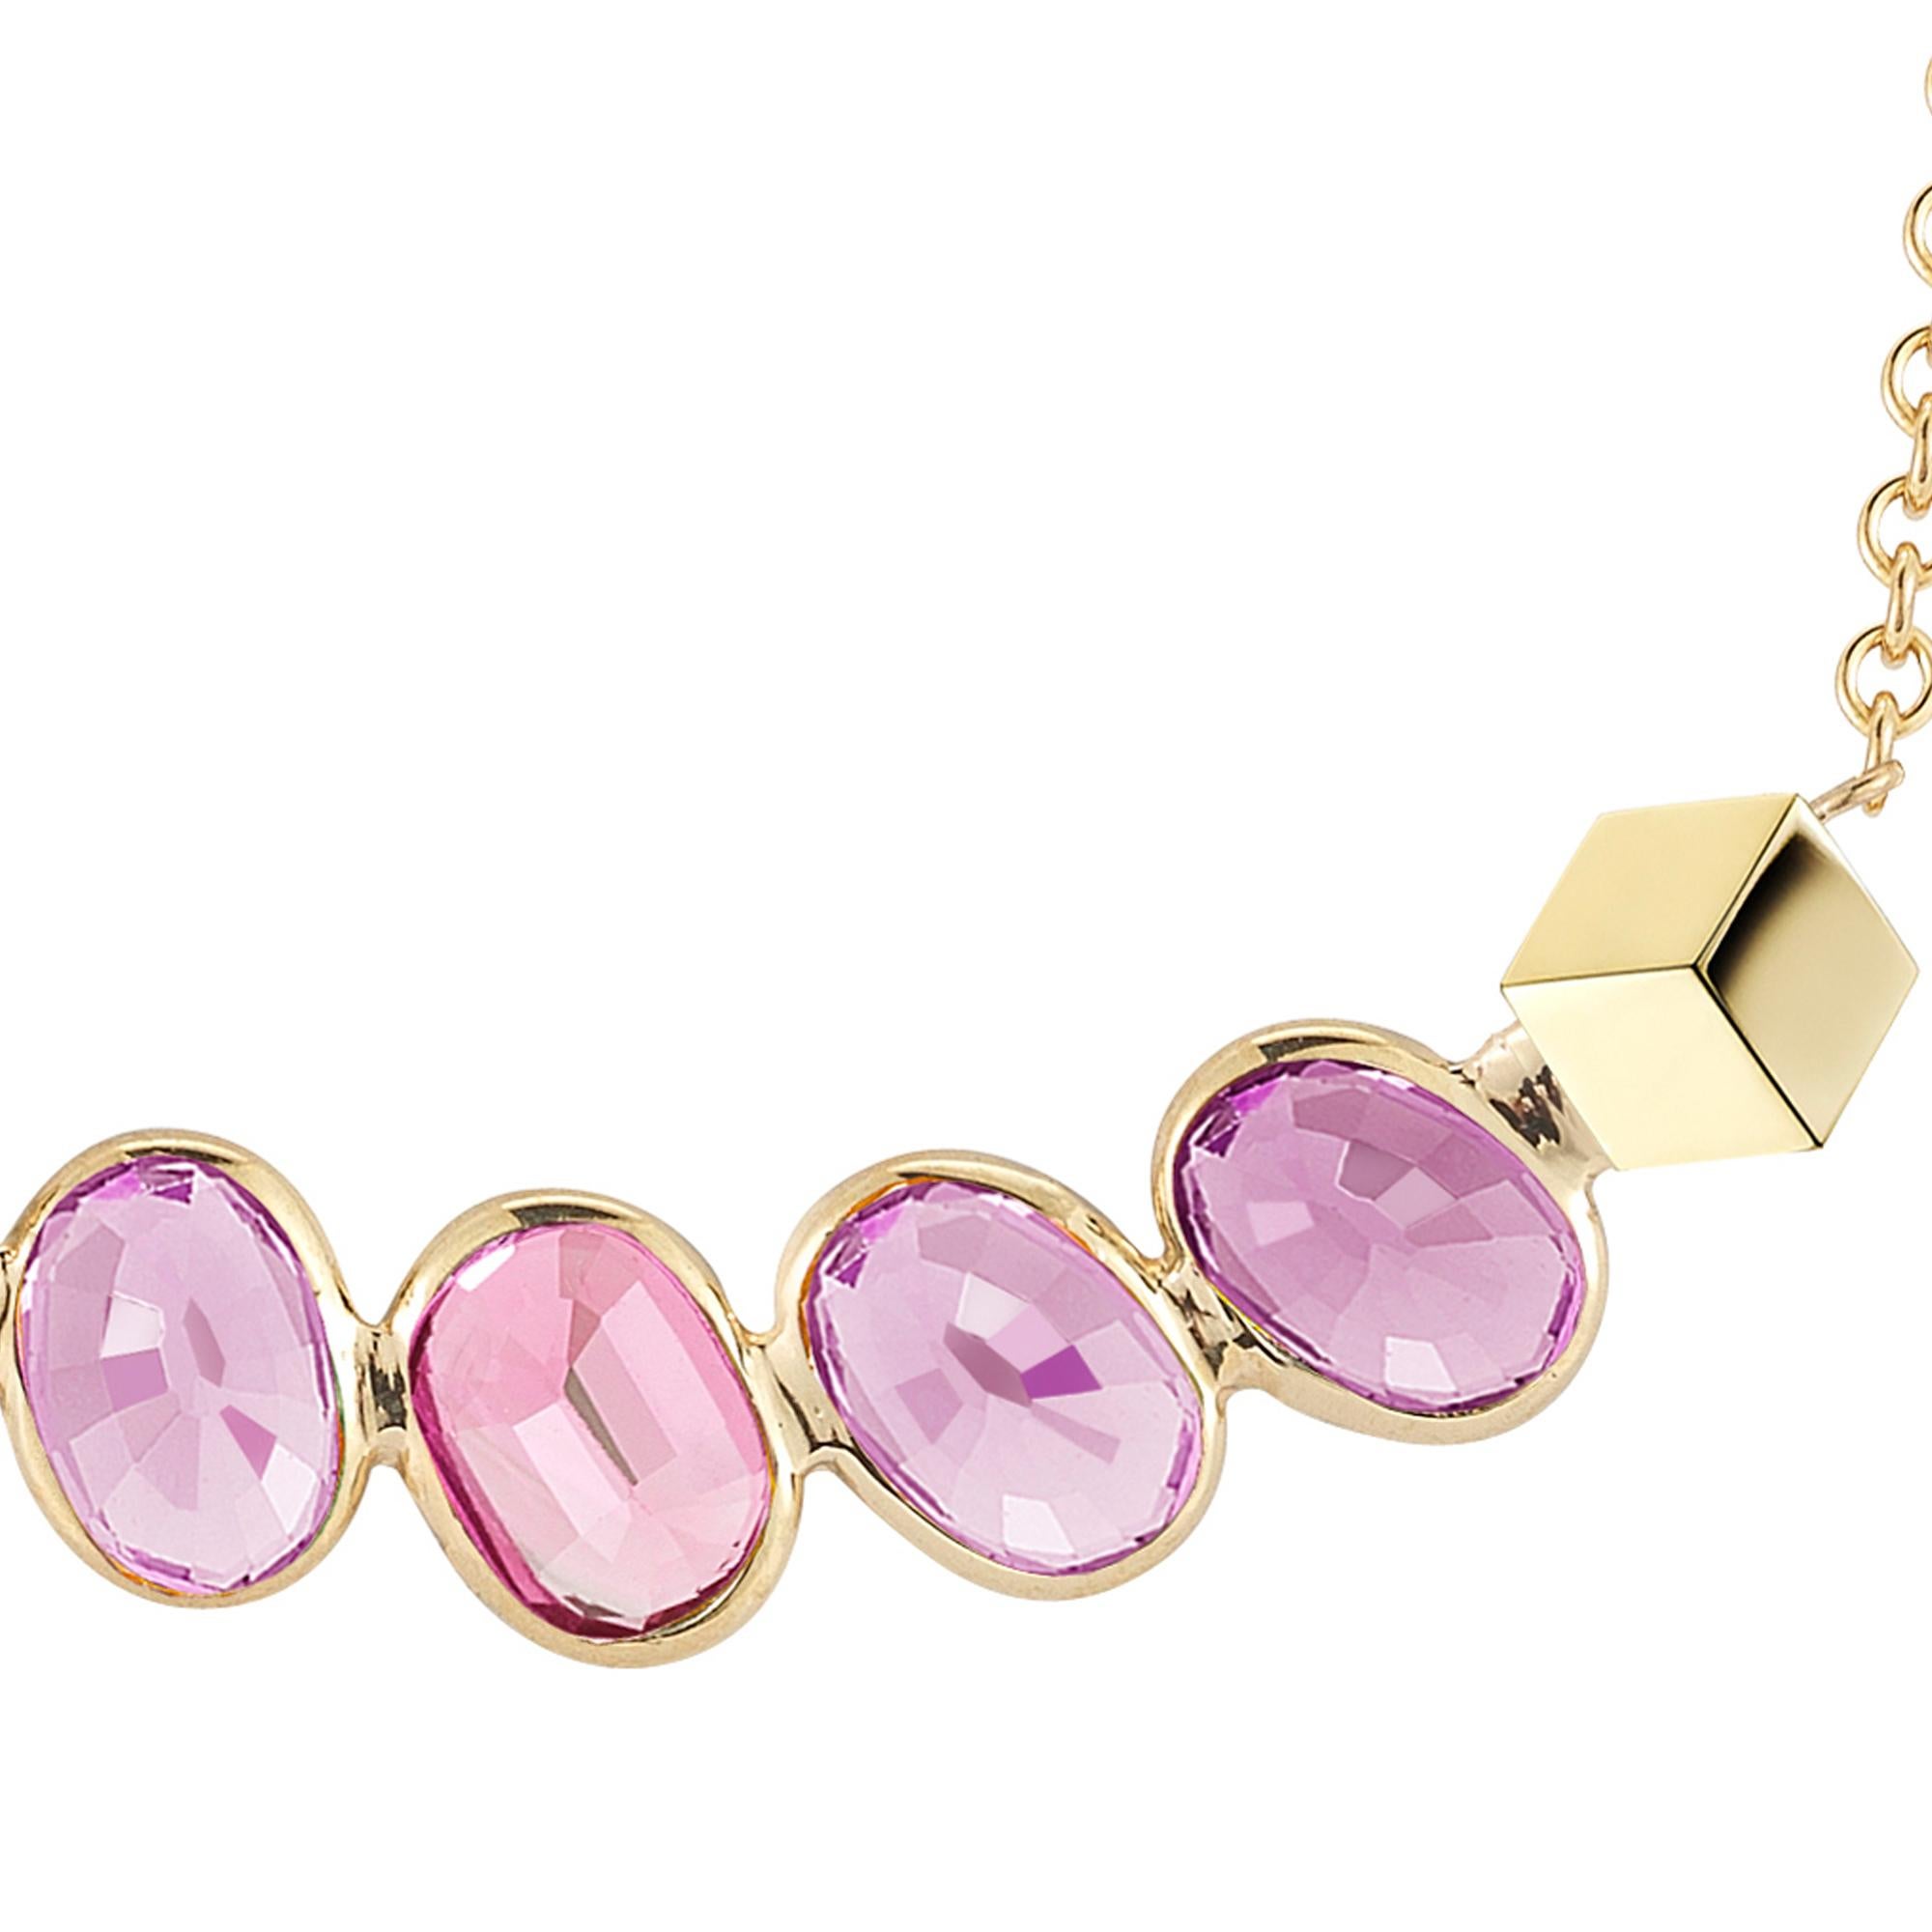 Contemporary Paolo Costagli 18kt Yellow Gold Pink Sapphire, 2.91 Carat Ombré Pendant Necklace For Sale